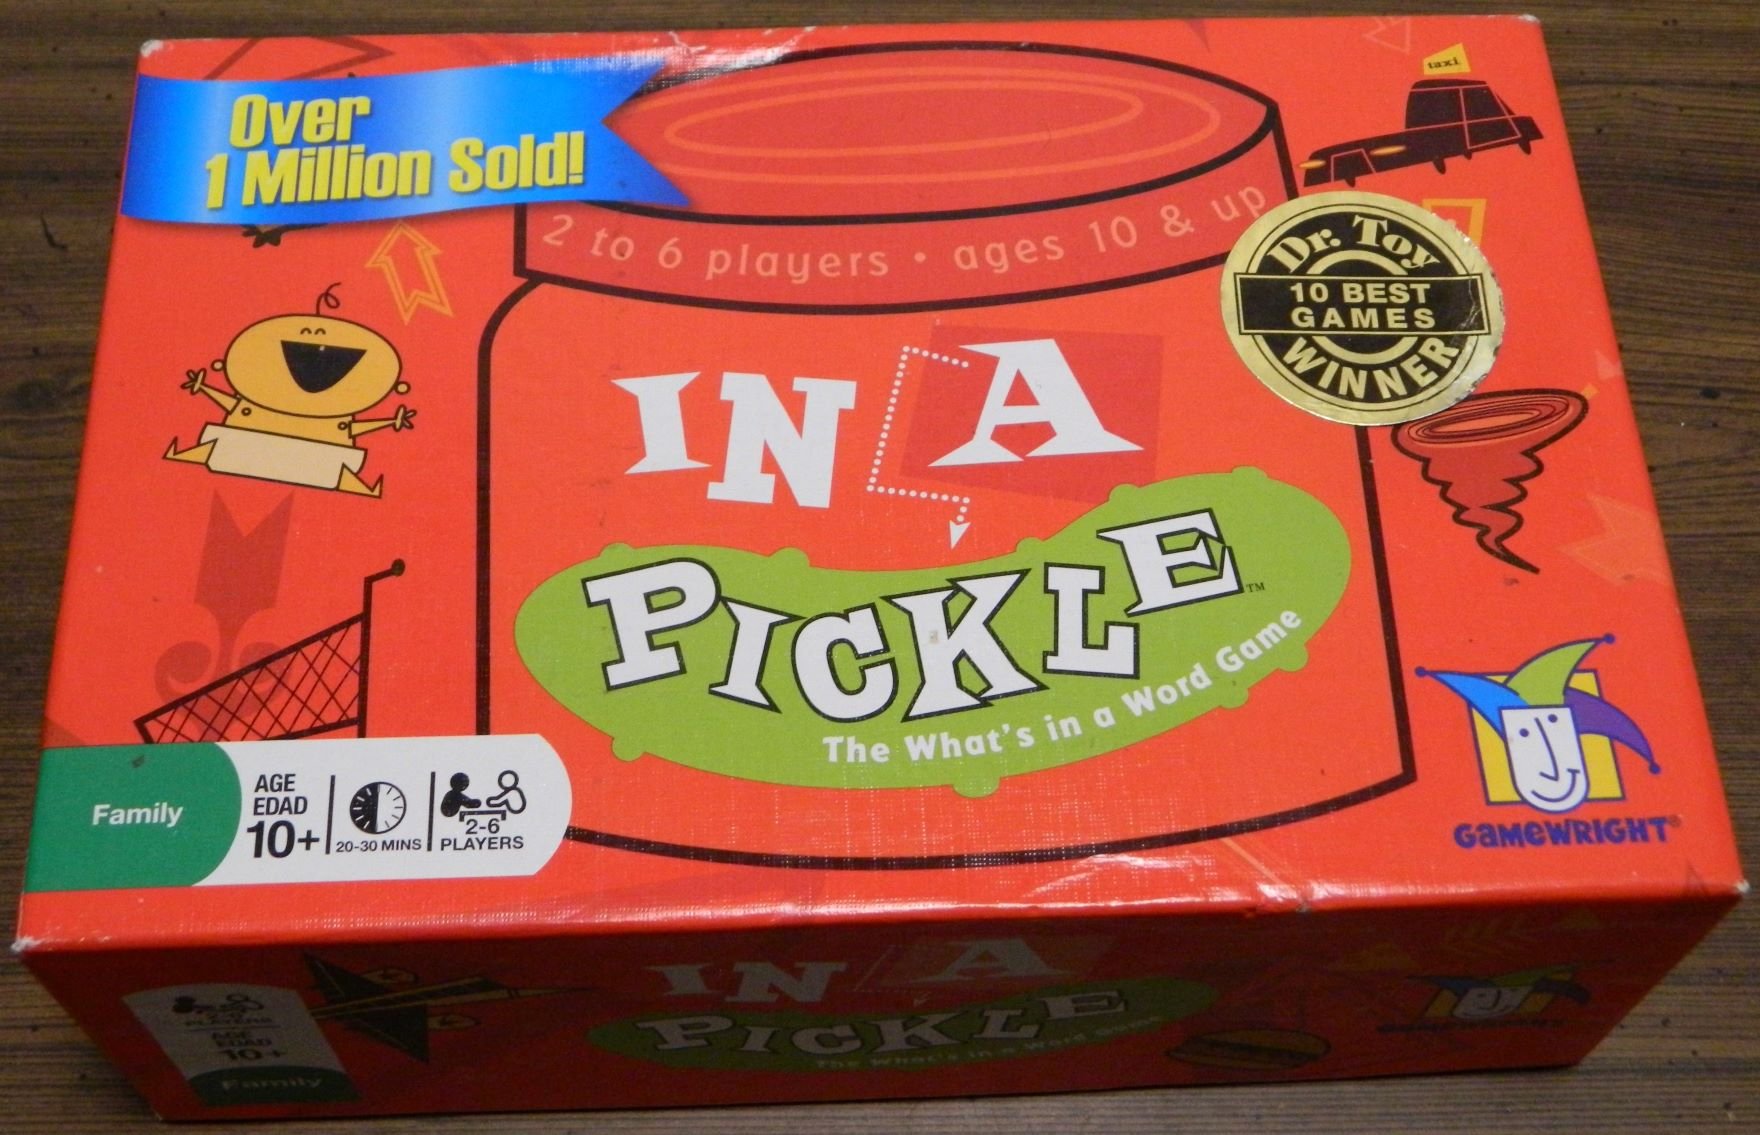 Box for In A Pickle